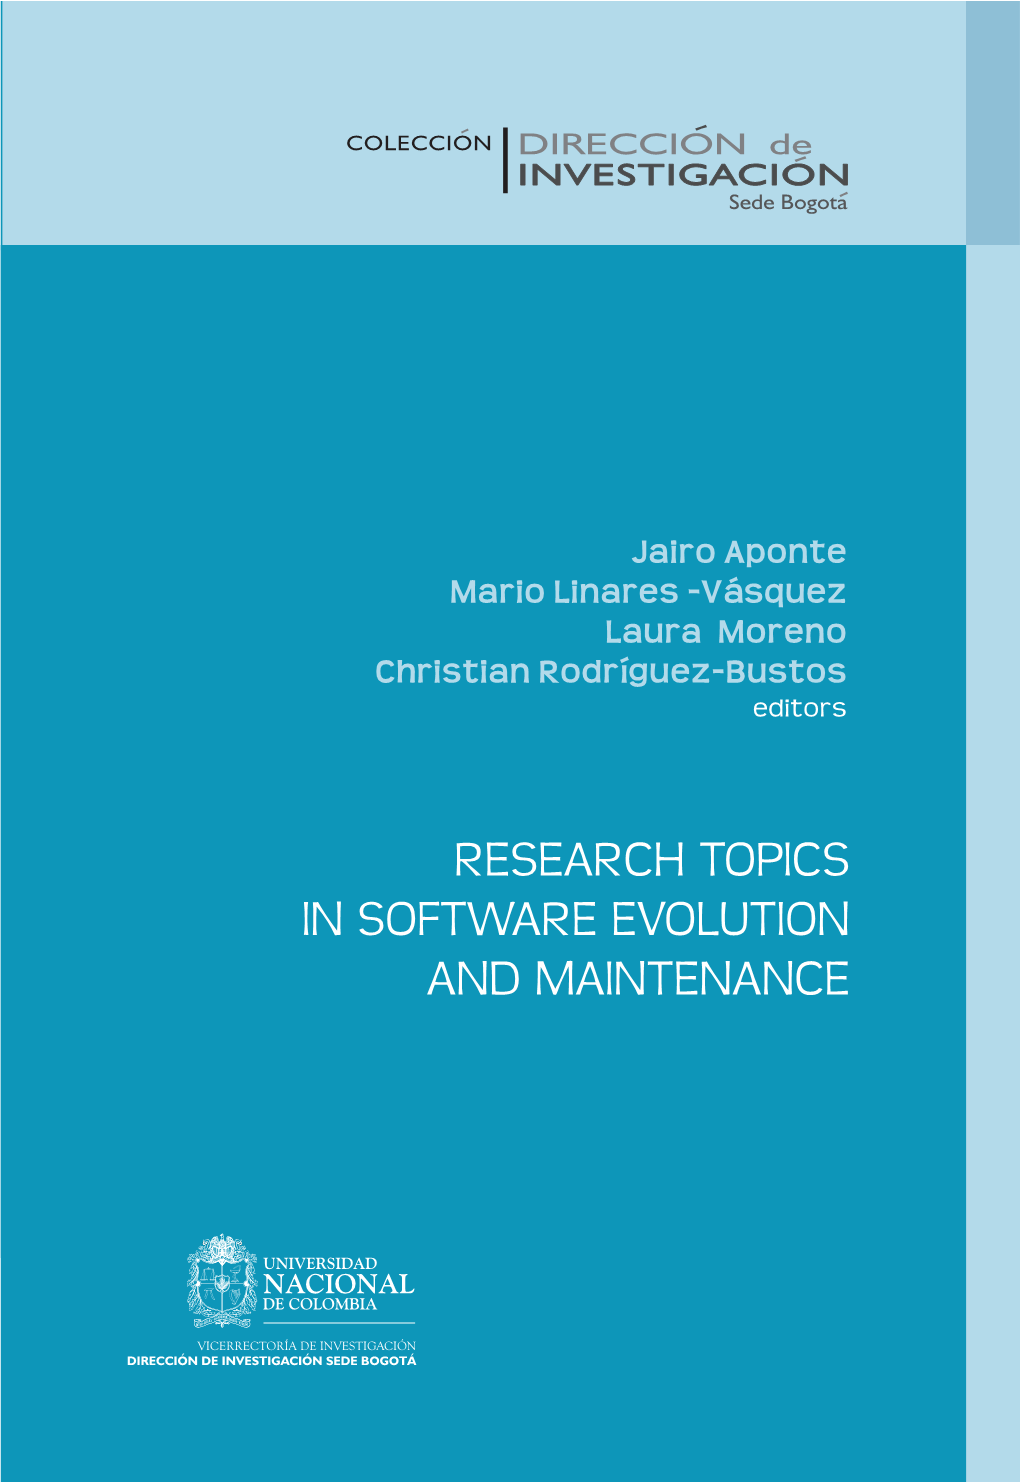 Research Topics in Software Evolution and Maintenance